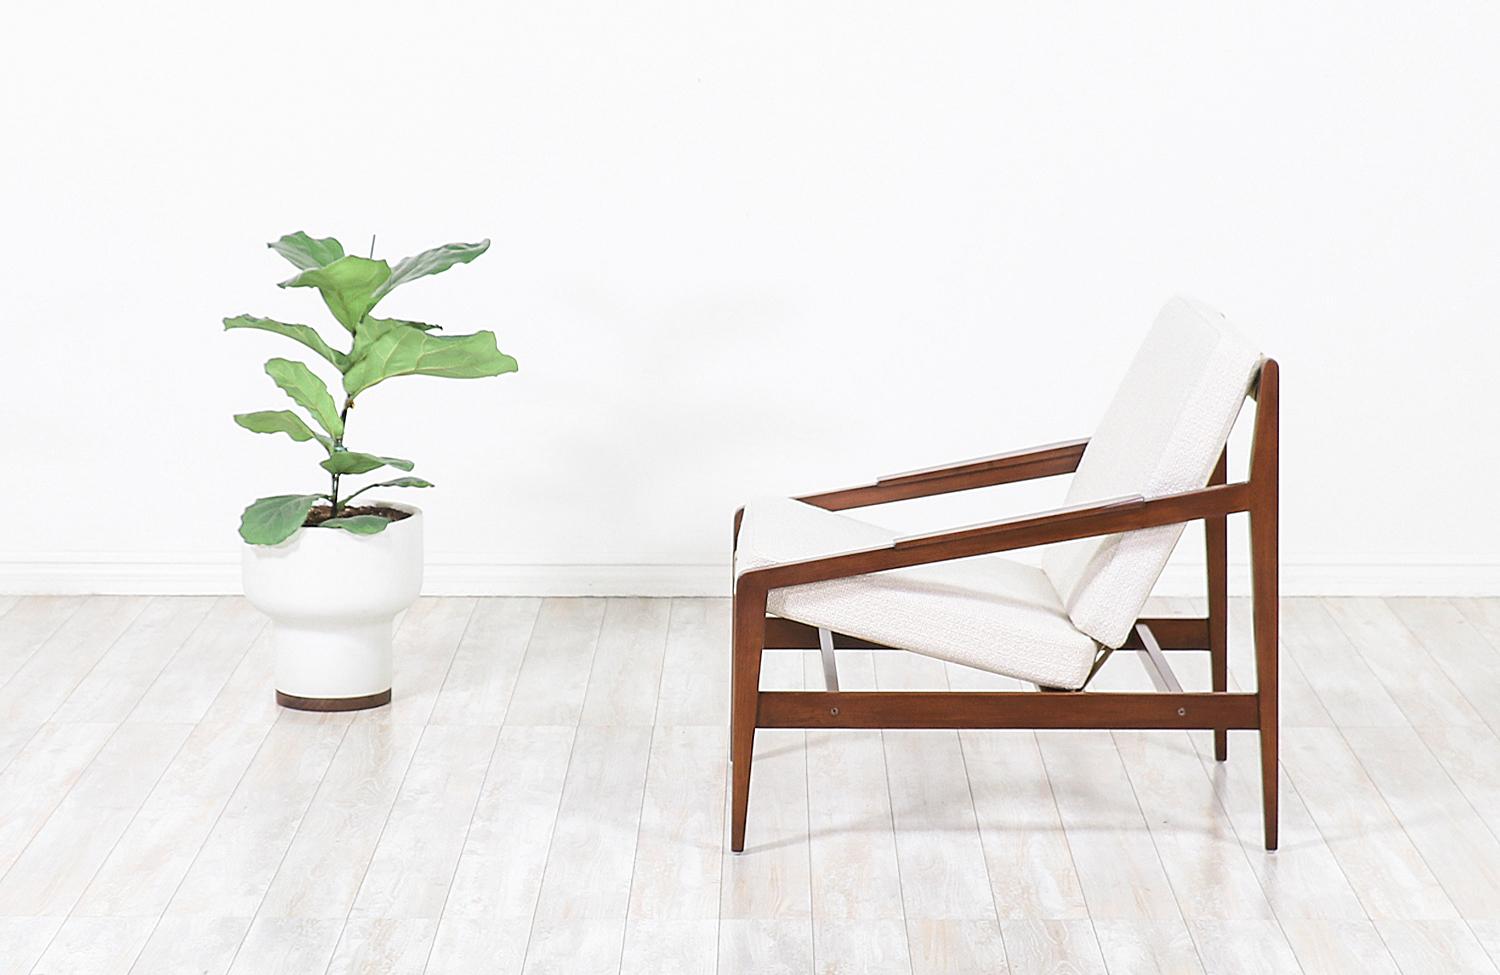 Elegant modern lounge chair designed by Ib Kofod-Larsen for Selig in Denmark, circa 1960s. This beautiful ergonomic lounge chair features a sturdy walnut-stained beech-wood frame with an angled seat and back that is held in place by new Pirelli